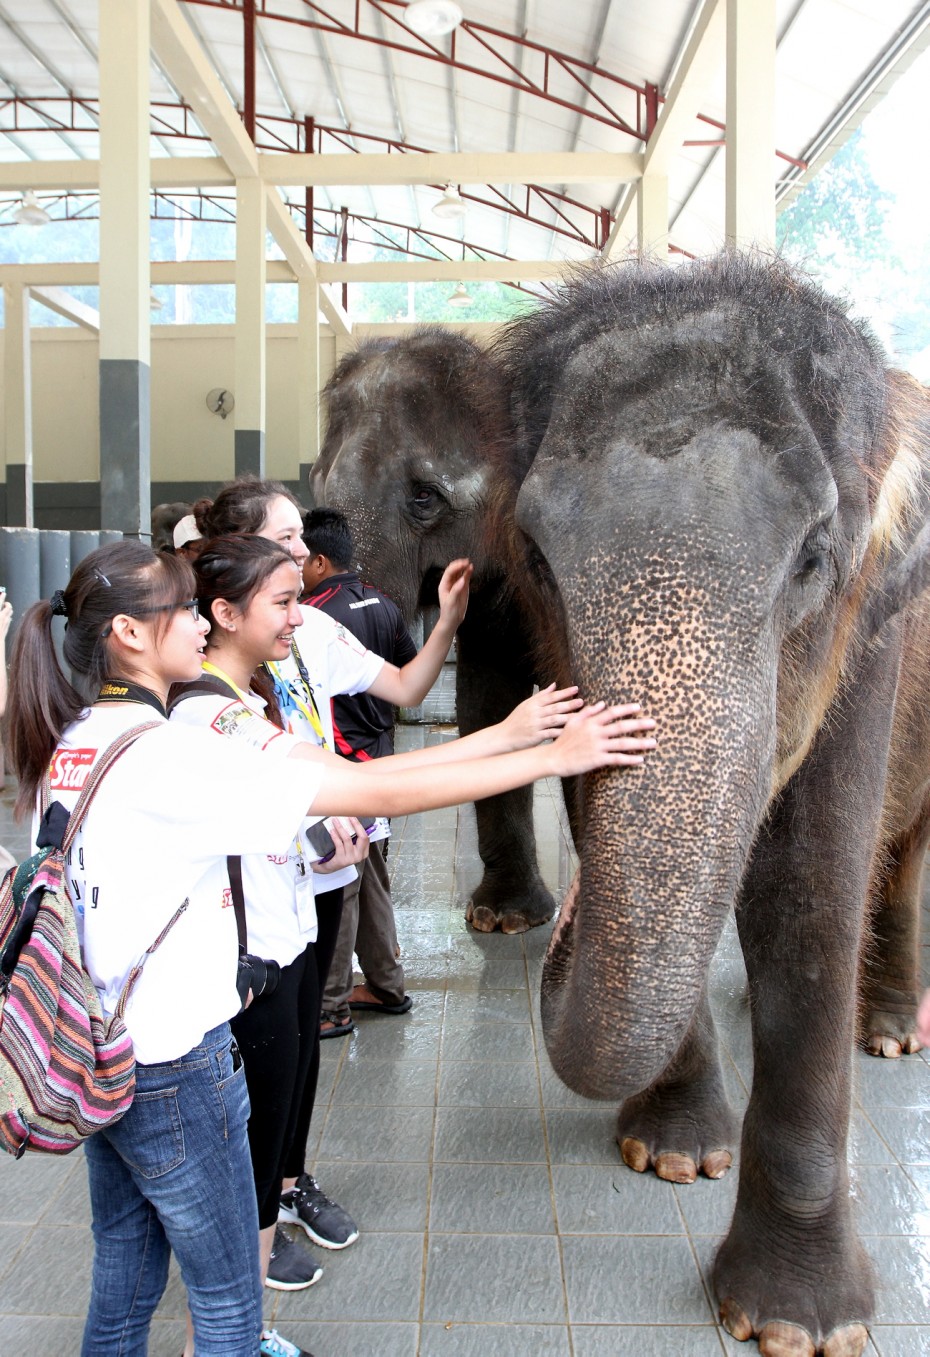 BRATs Raub participants got up close and personal with these big grey beasts at the Kuala Gandah Elephant Sanctuary. But it wasn’t all fun and games - they had to clean out the elephants’ stalls and feed them brunch, too! Photo: SAMUEL ONG/ The Star